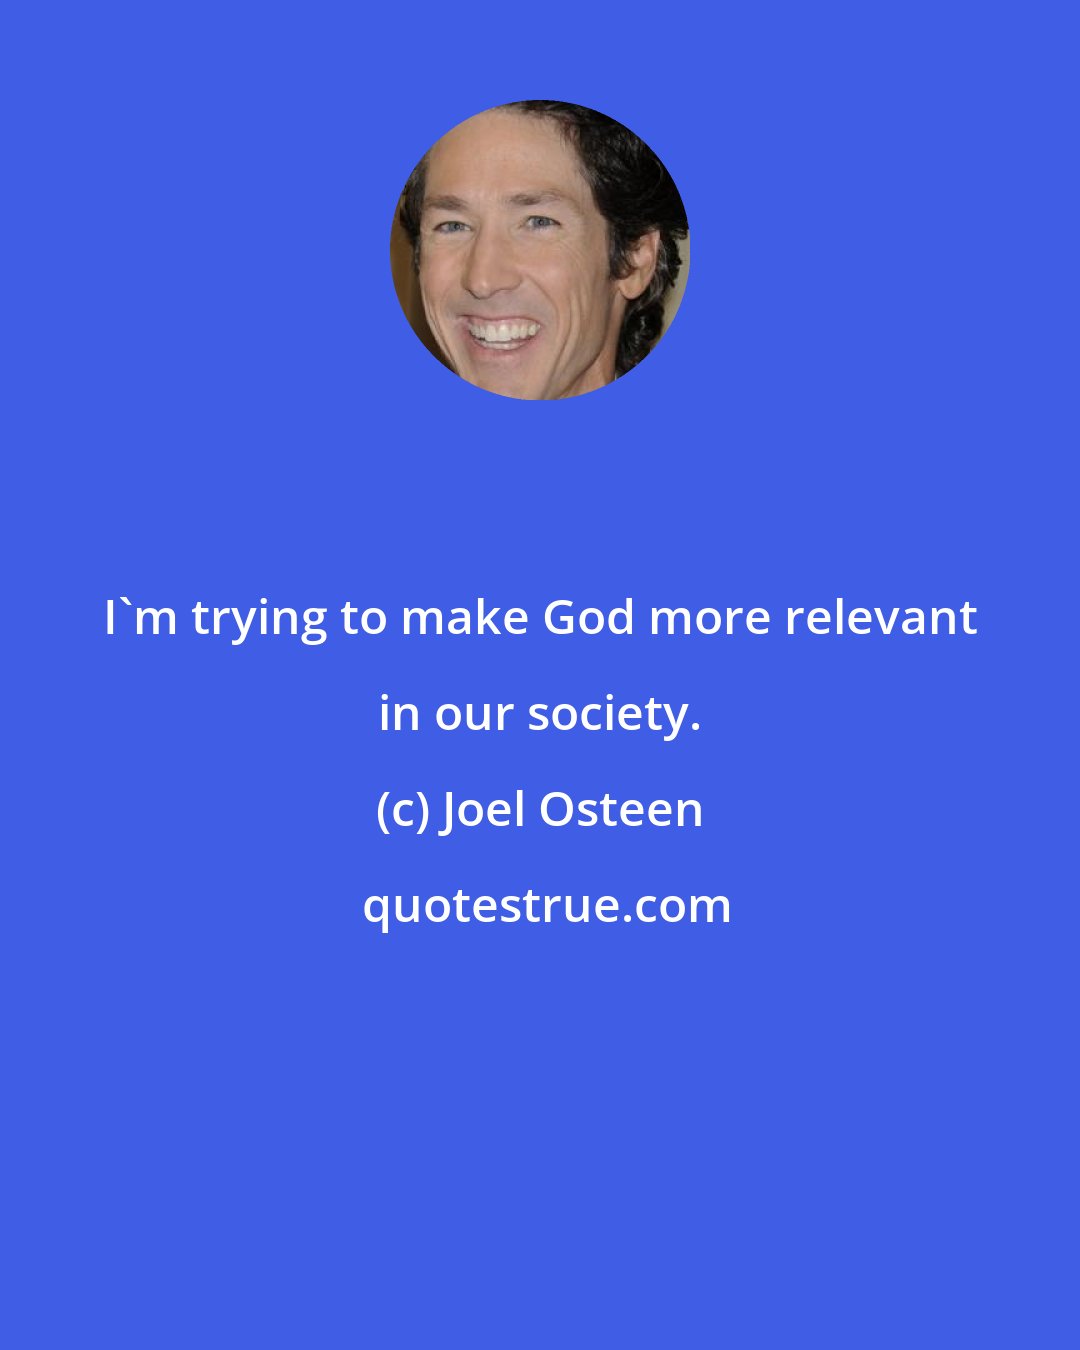 Joel Osteen: I'm trying to make God more relevant in our society.